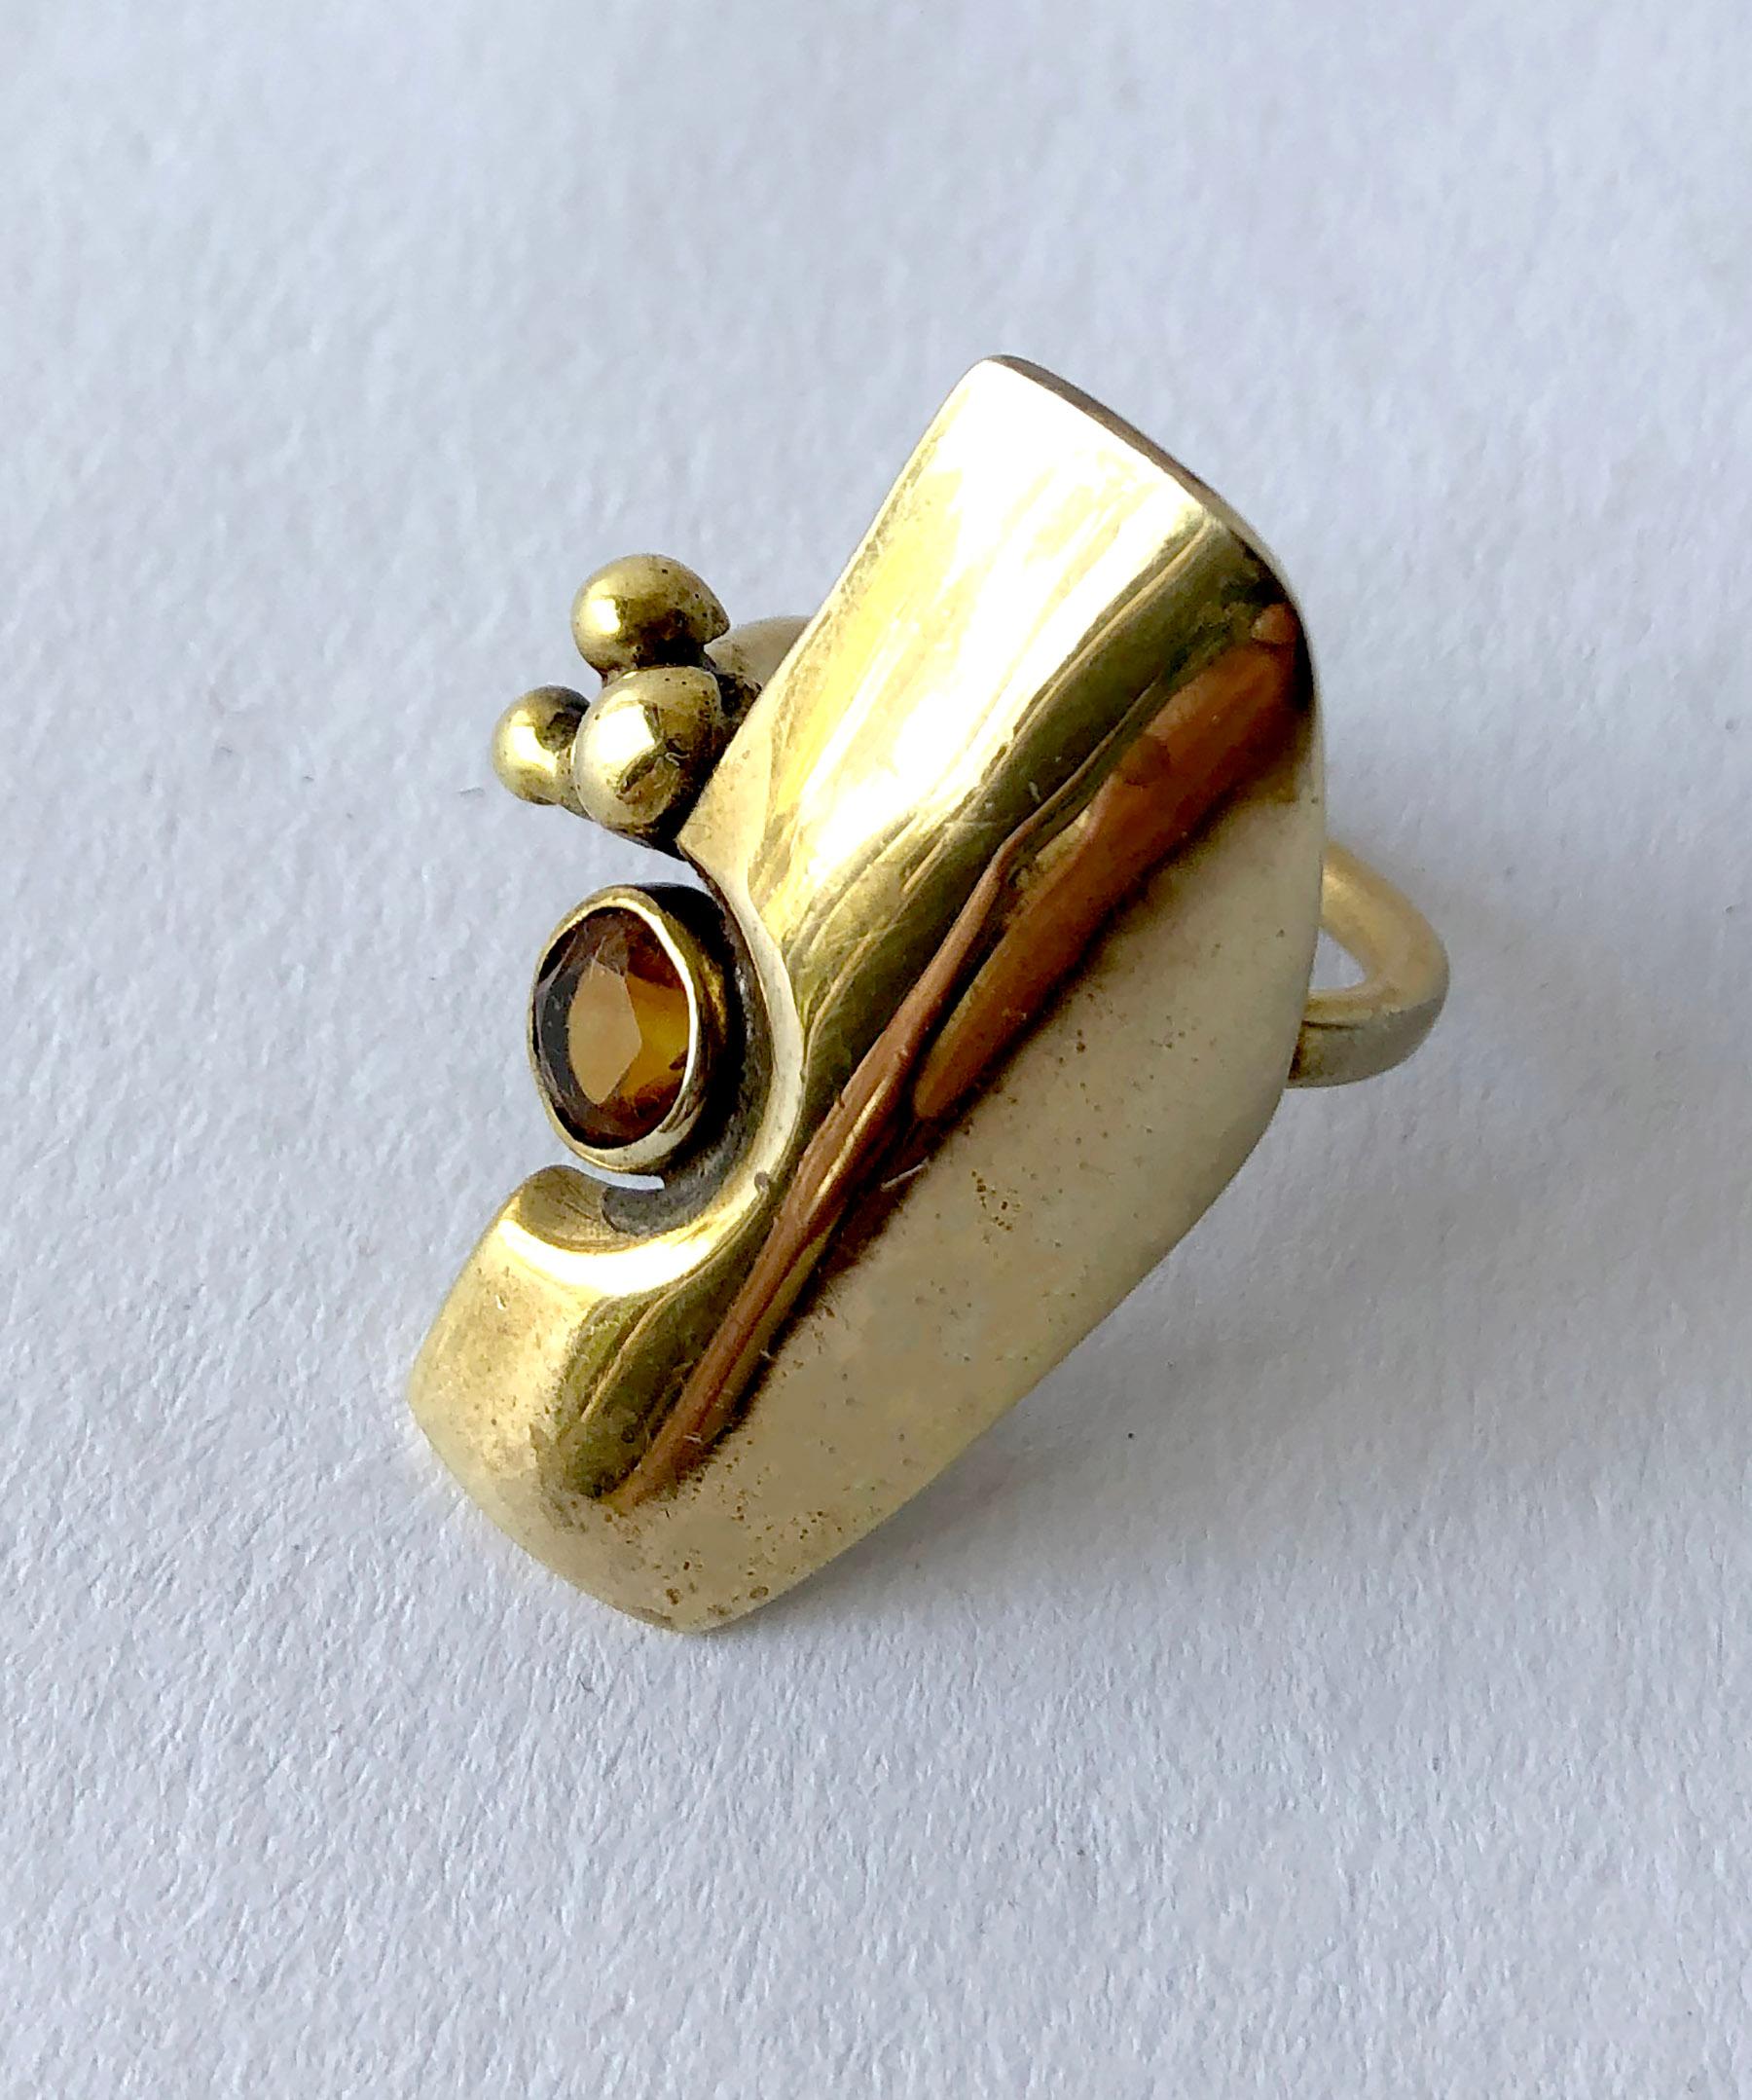 Bronze and faceted citrine ring created by Jack Boyd of San Diego, California.  Ring is a finger size 7.25 and is signed with the artists' hallmark of JB.  In very good vintage condition.
Boyd was a well respected member of the Allied Craftsmen of